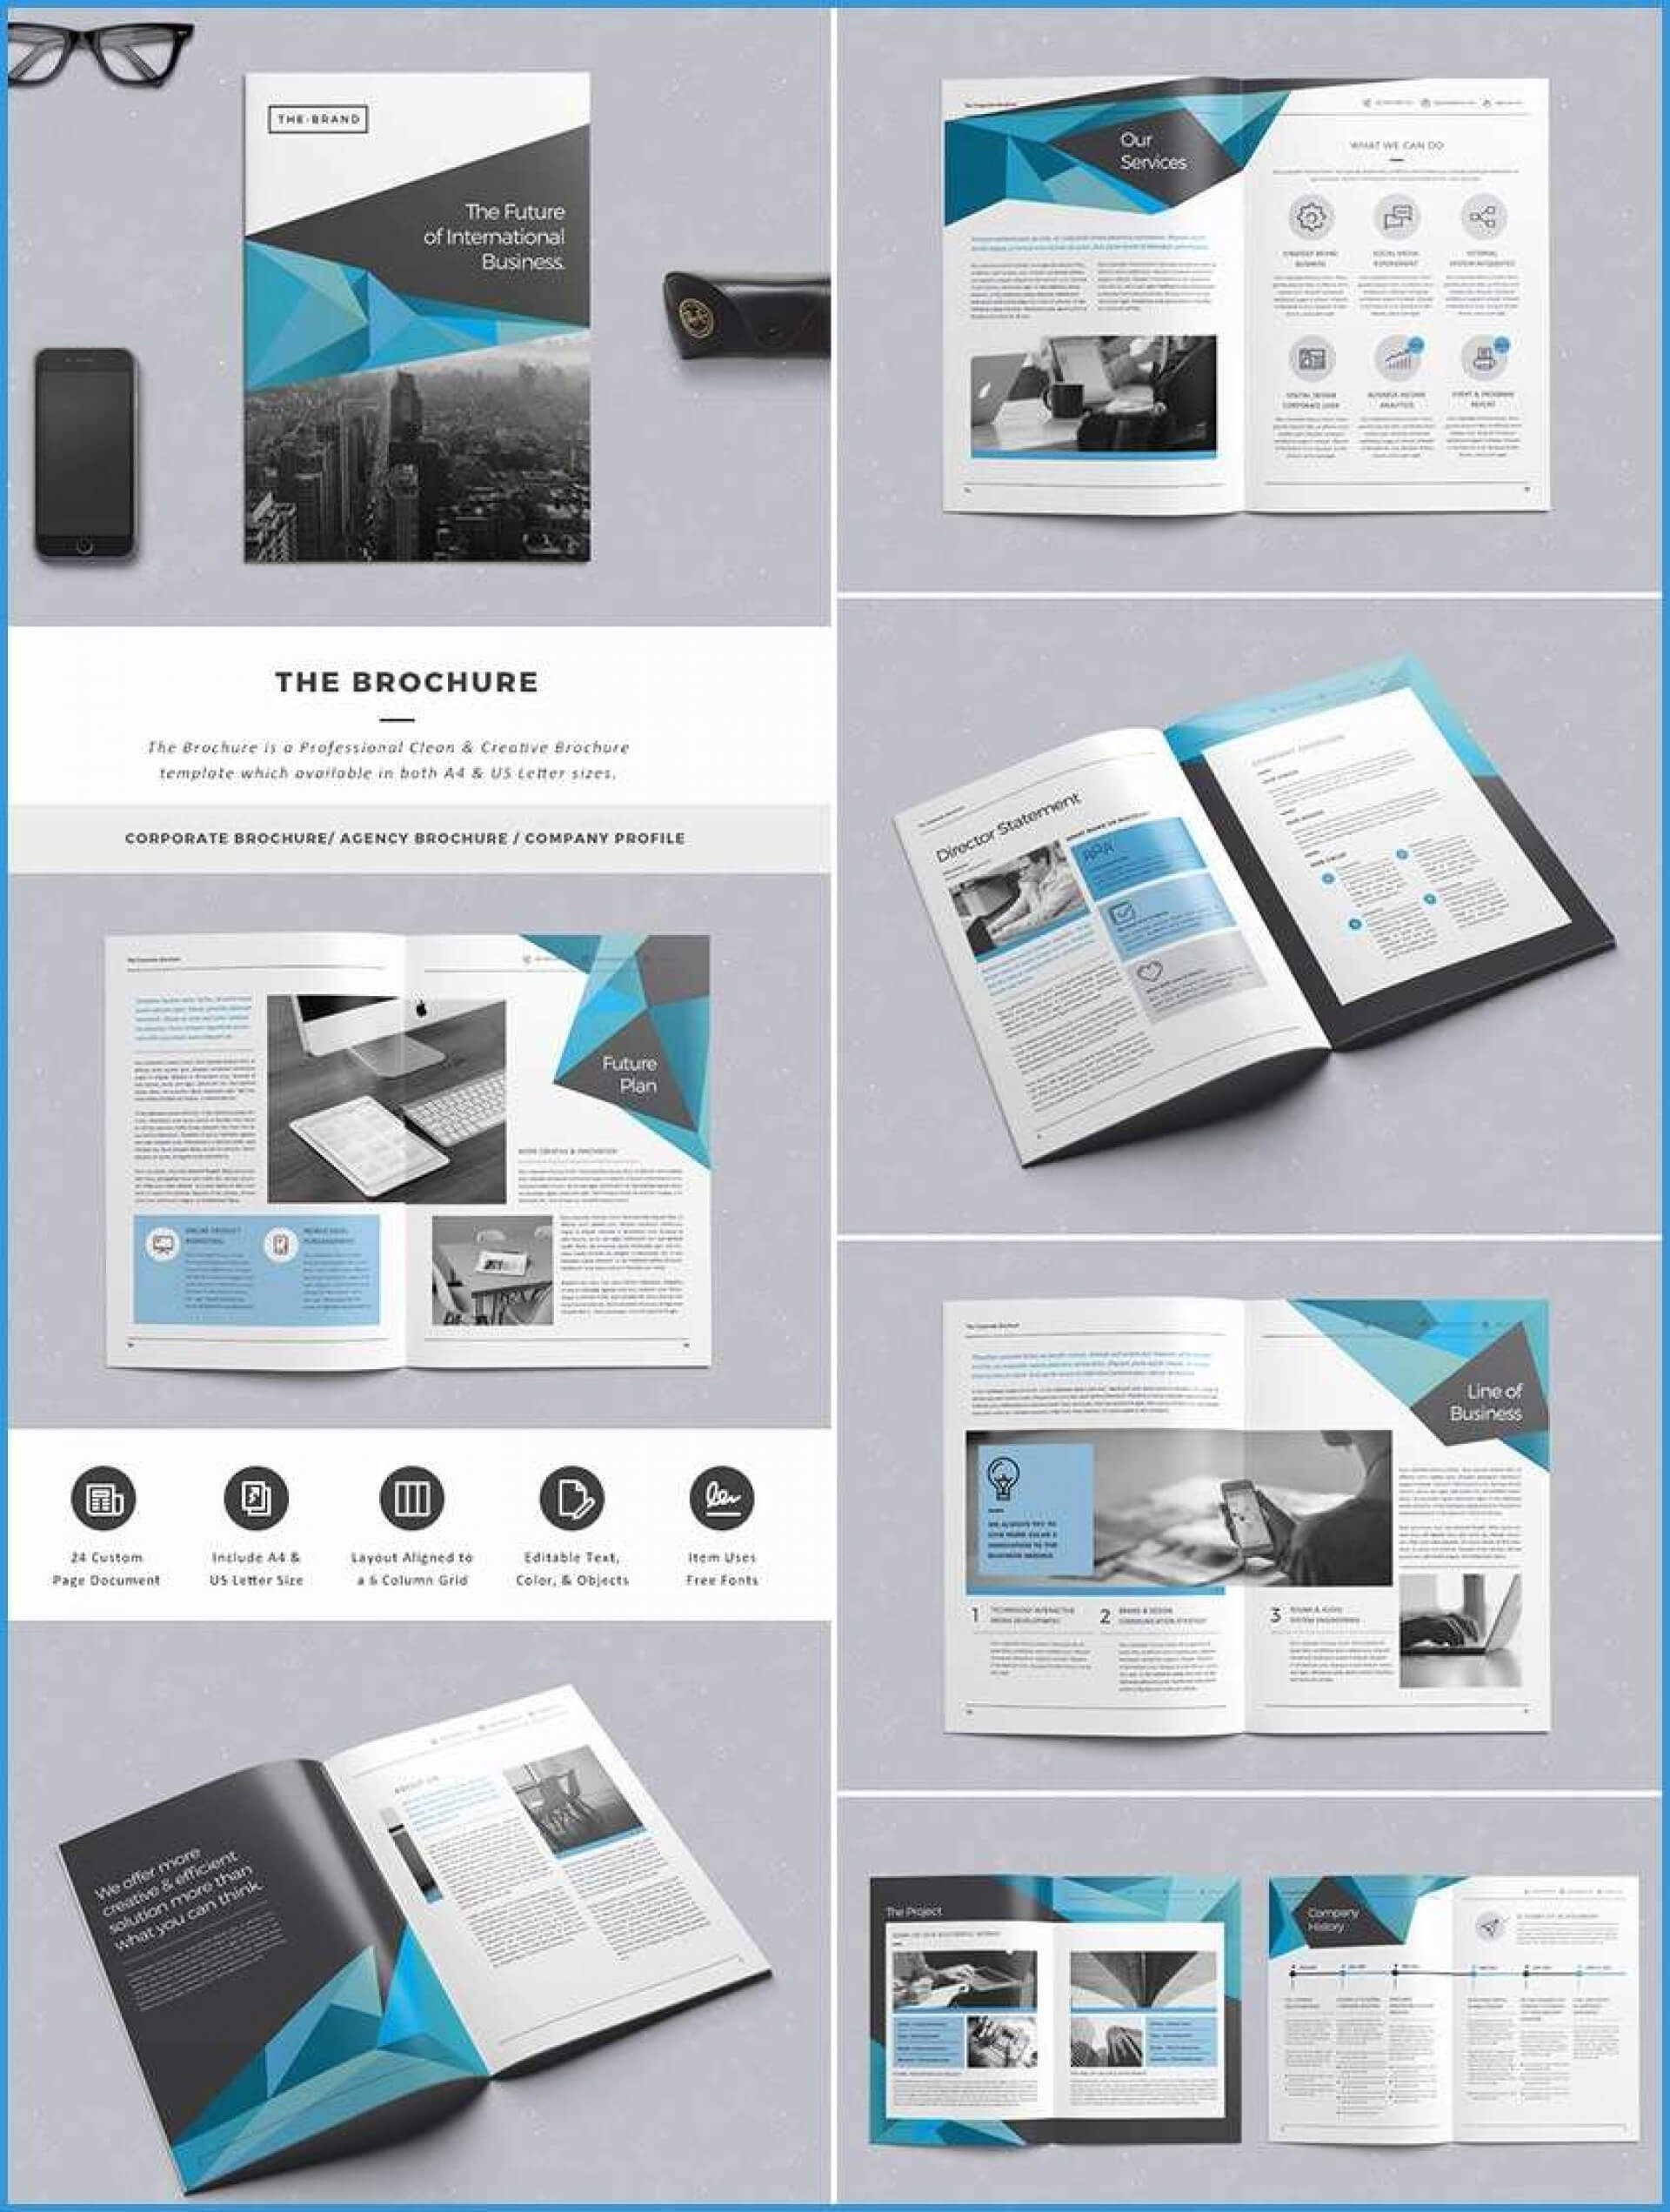 044 Adobe Indesign Flyer Templates Free Awesome Brochure Intended For Adobe Indesign Brochure Templates